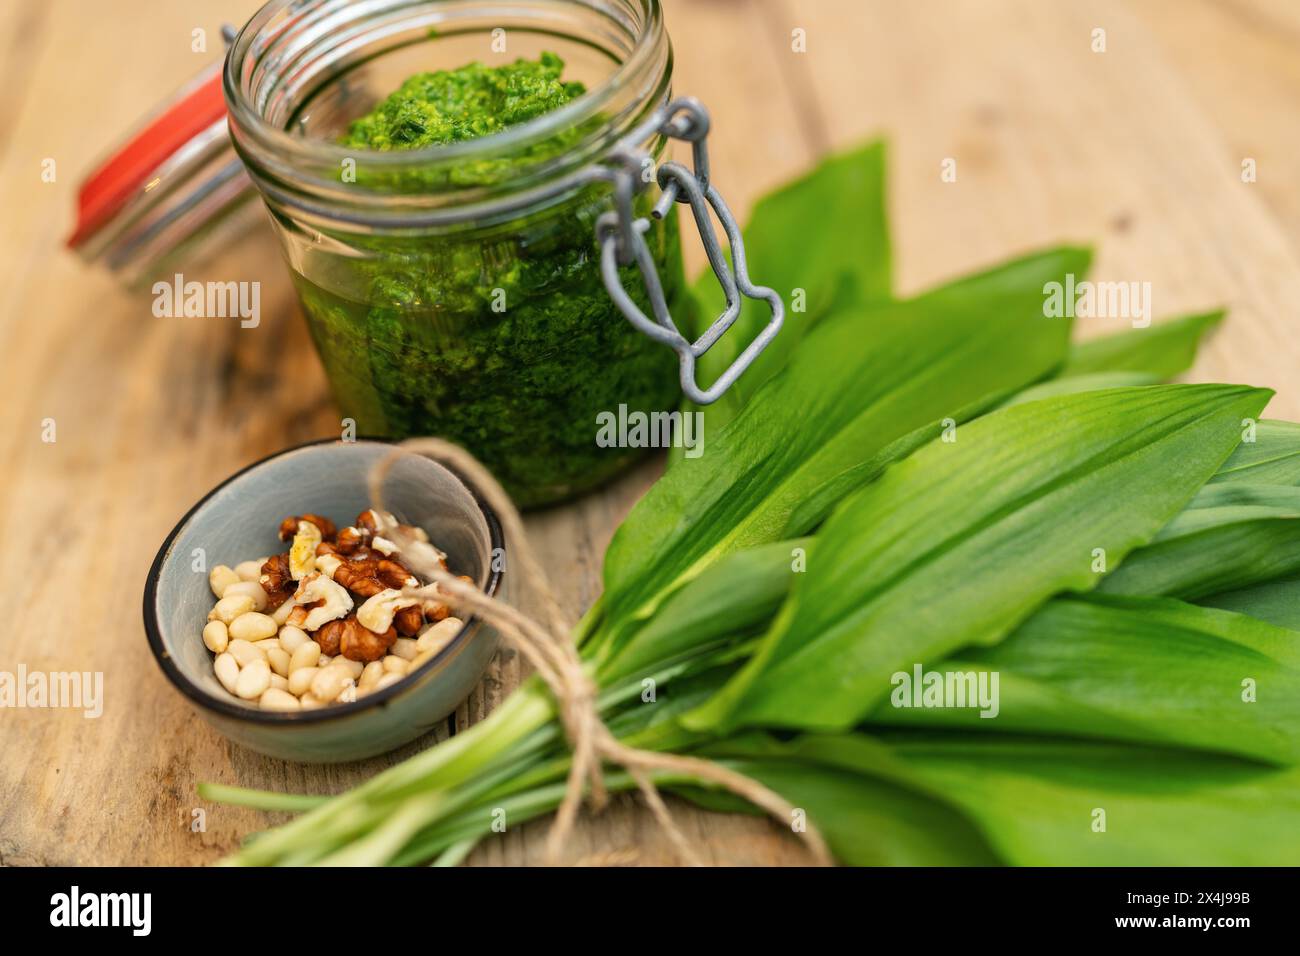 Jar of wild garlic pesto with pine nuts, walnuts, and fresh leaves on a wooden table Stock Photo